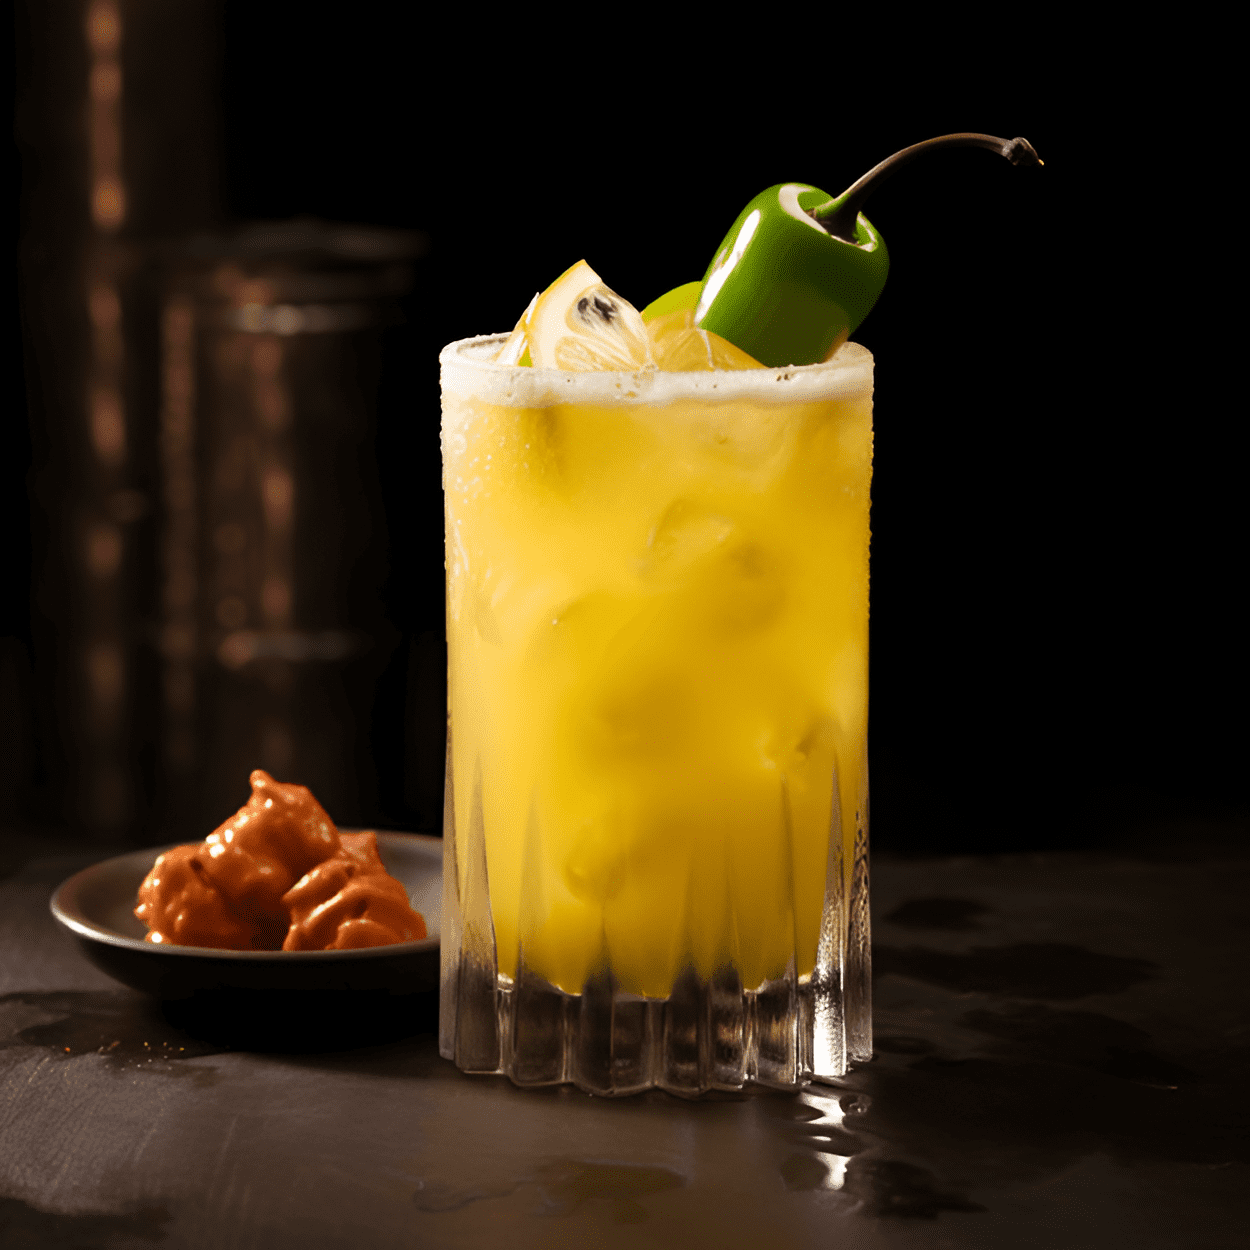 Chupacabra Cocktail Recipe - The Chupacabra cocktail is a complex blend of sweet, sour, and spicy flavors. The sweetness of the pineapple juice is balanced by the tartness of the lime juice, while the tequila and jalapeno add a spicy kick. The result is a cocktail that is both refreshing and invigorating.